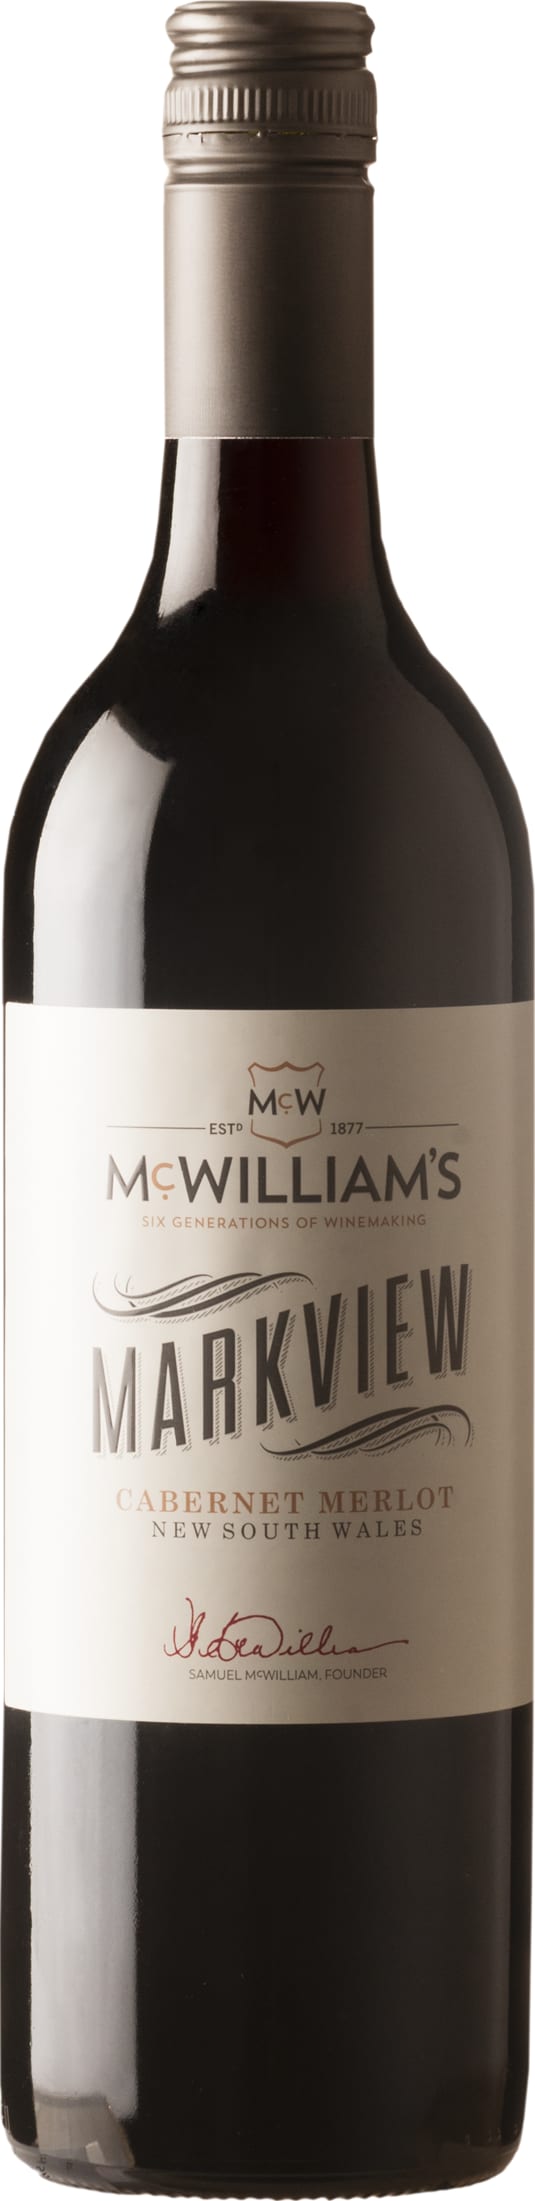 McWilliams Markview Cabernet Merlot 75cl NV - Buy McWilliams Wines from GREAT WINES DIRECT wine shop